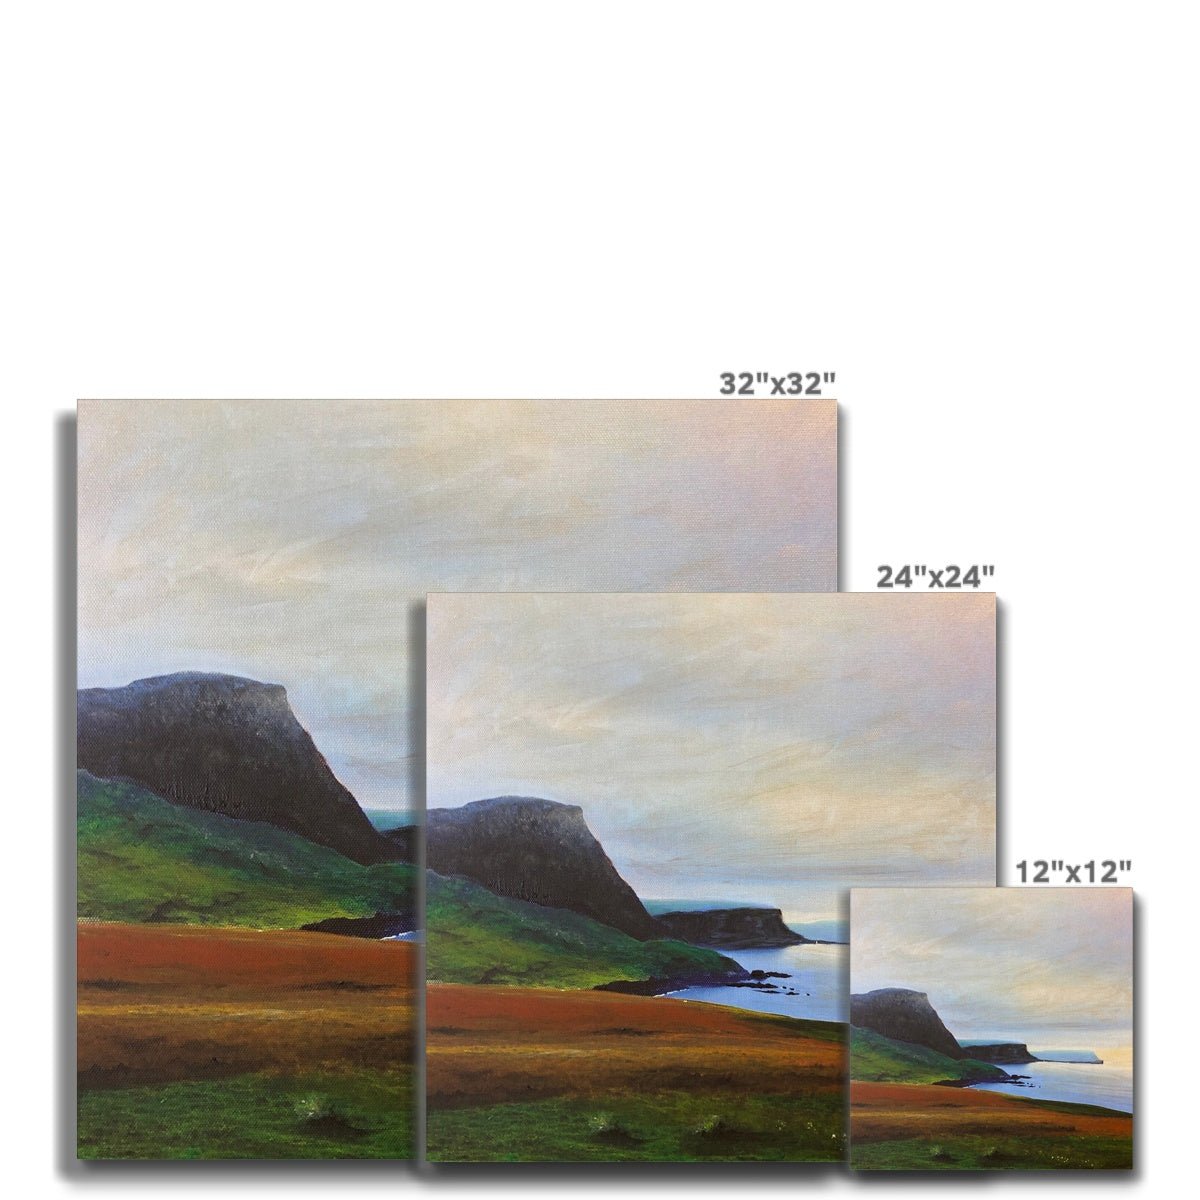 Neist Point Cliffs Skye Painting | Canvas From Scotland-Contemporary Stretched Canvas Prints-Skye Art Gallery-Paintings, Prints, Homeware, Art Gifts From Scotland By Scottish Artist Kevin Hunter